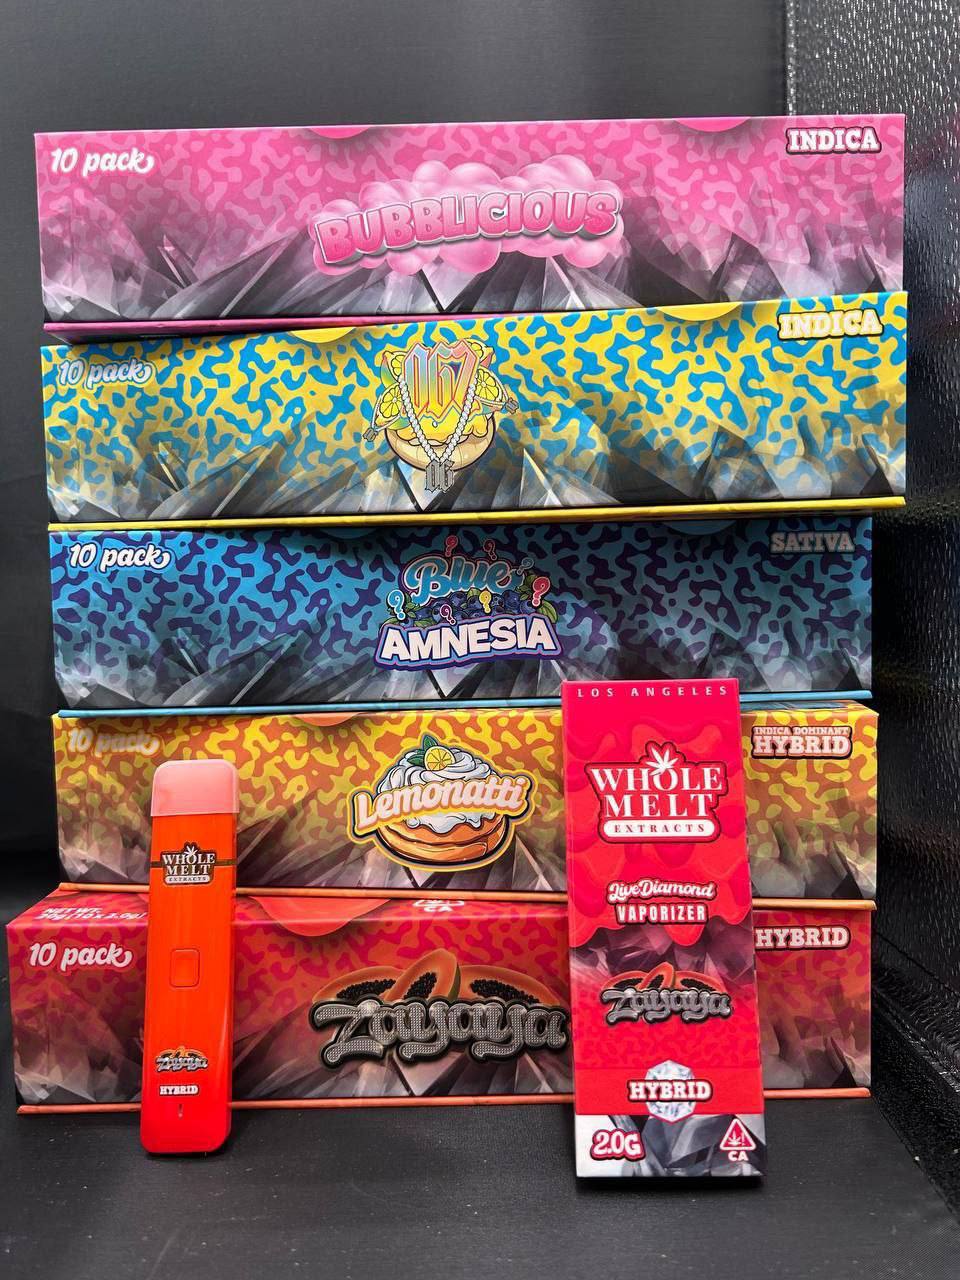 A stack of colorful Import placeholder for 49 boxes towers on a table. The boxes are labeled with various strains: Dubblicious, Zaza, Blue Amnesia, Lemonatti Hybrid, and more. In front, there are two vape pens and additional packaging for Whole Melt Extracts.